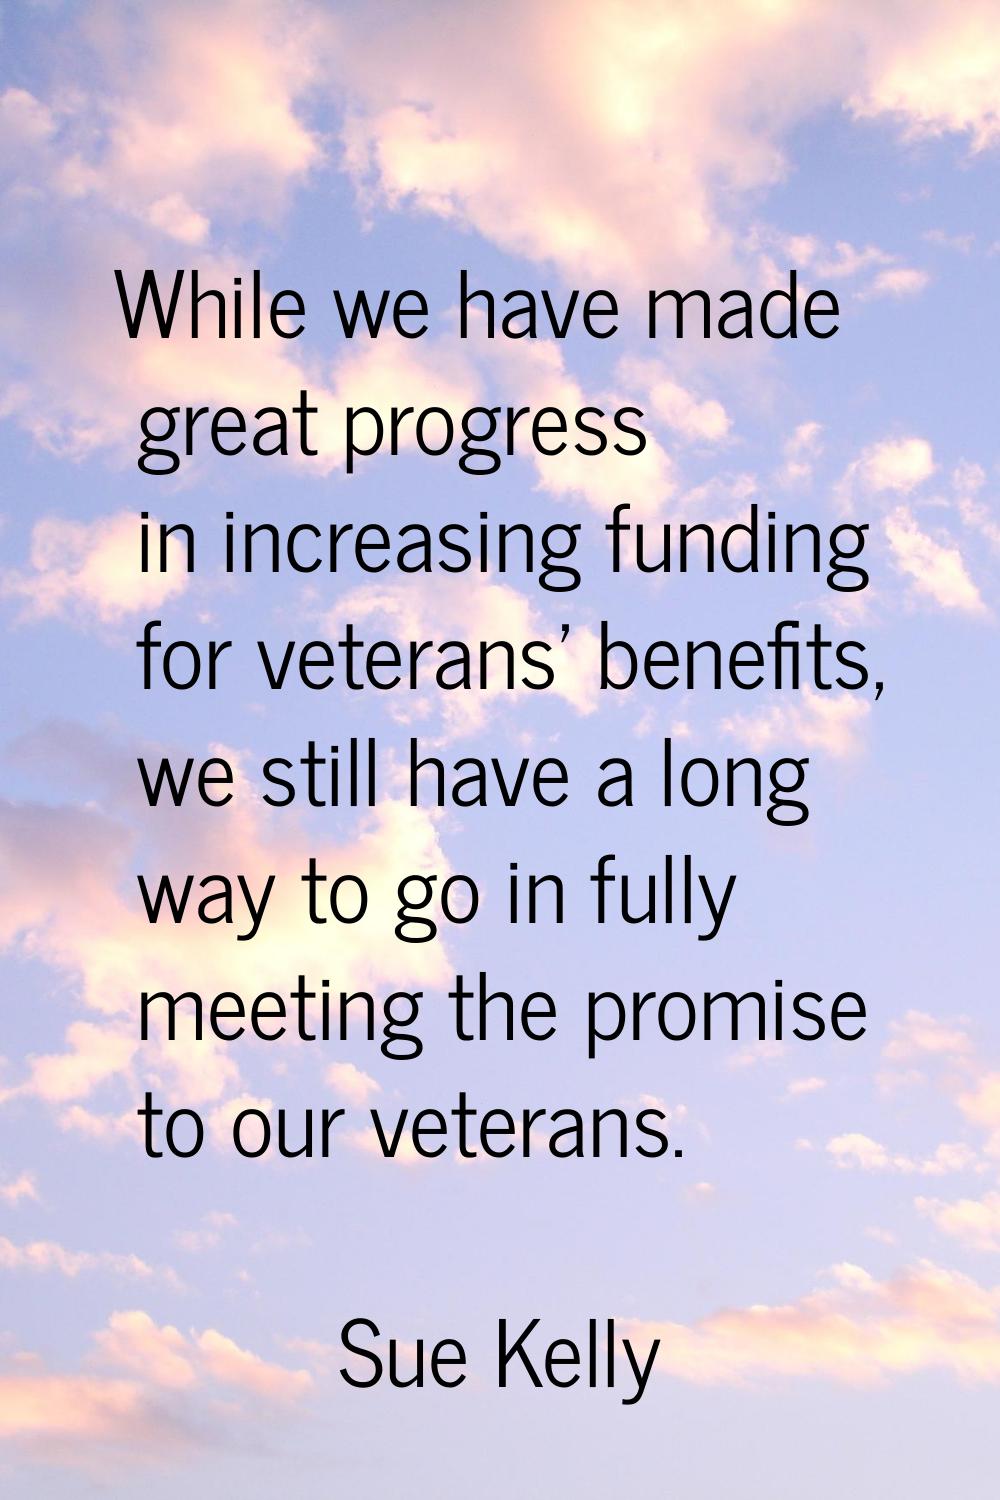 While we have made great progress in increasing funding for veterans' benefits, we still have a lon